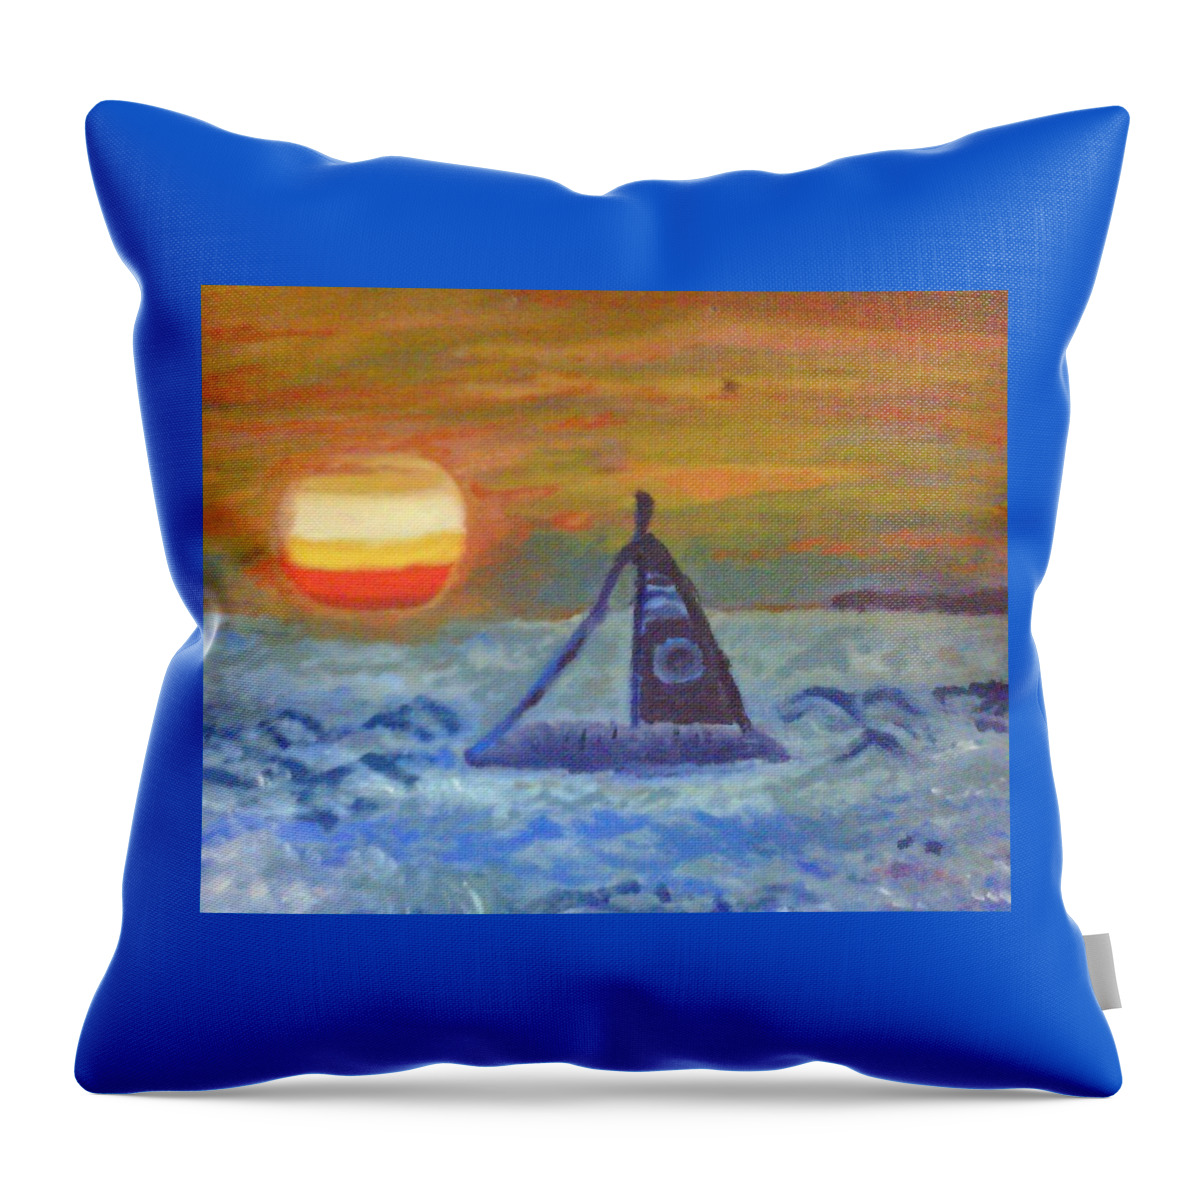 Florida Throw Pillow featuring the painting Florida Key Sunset by Suzanne Berthier